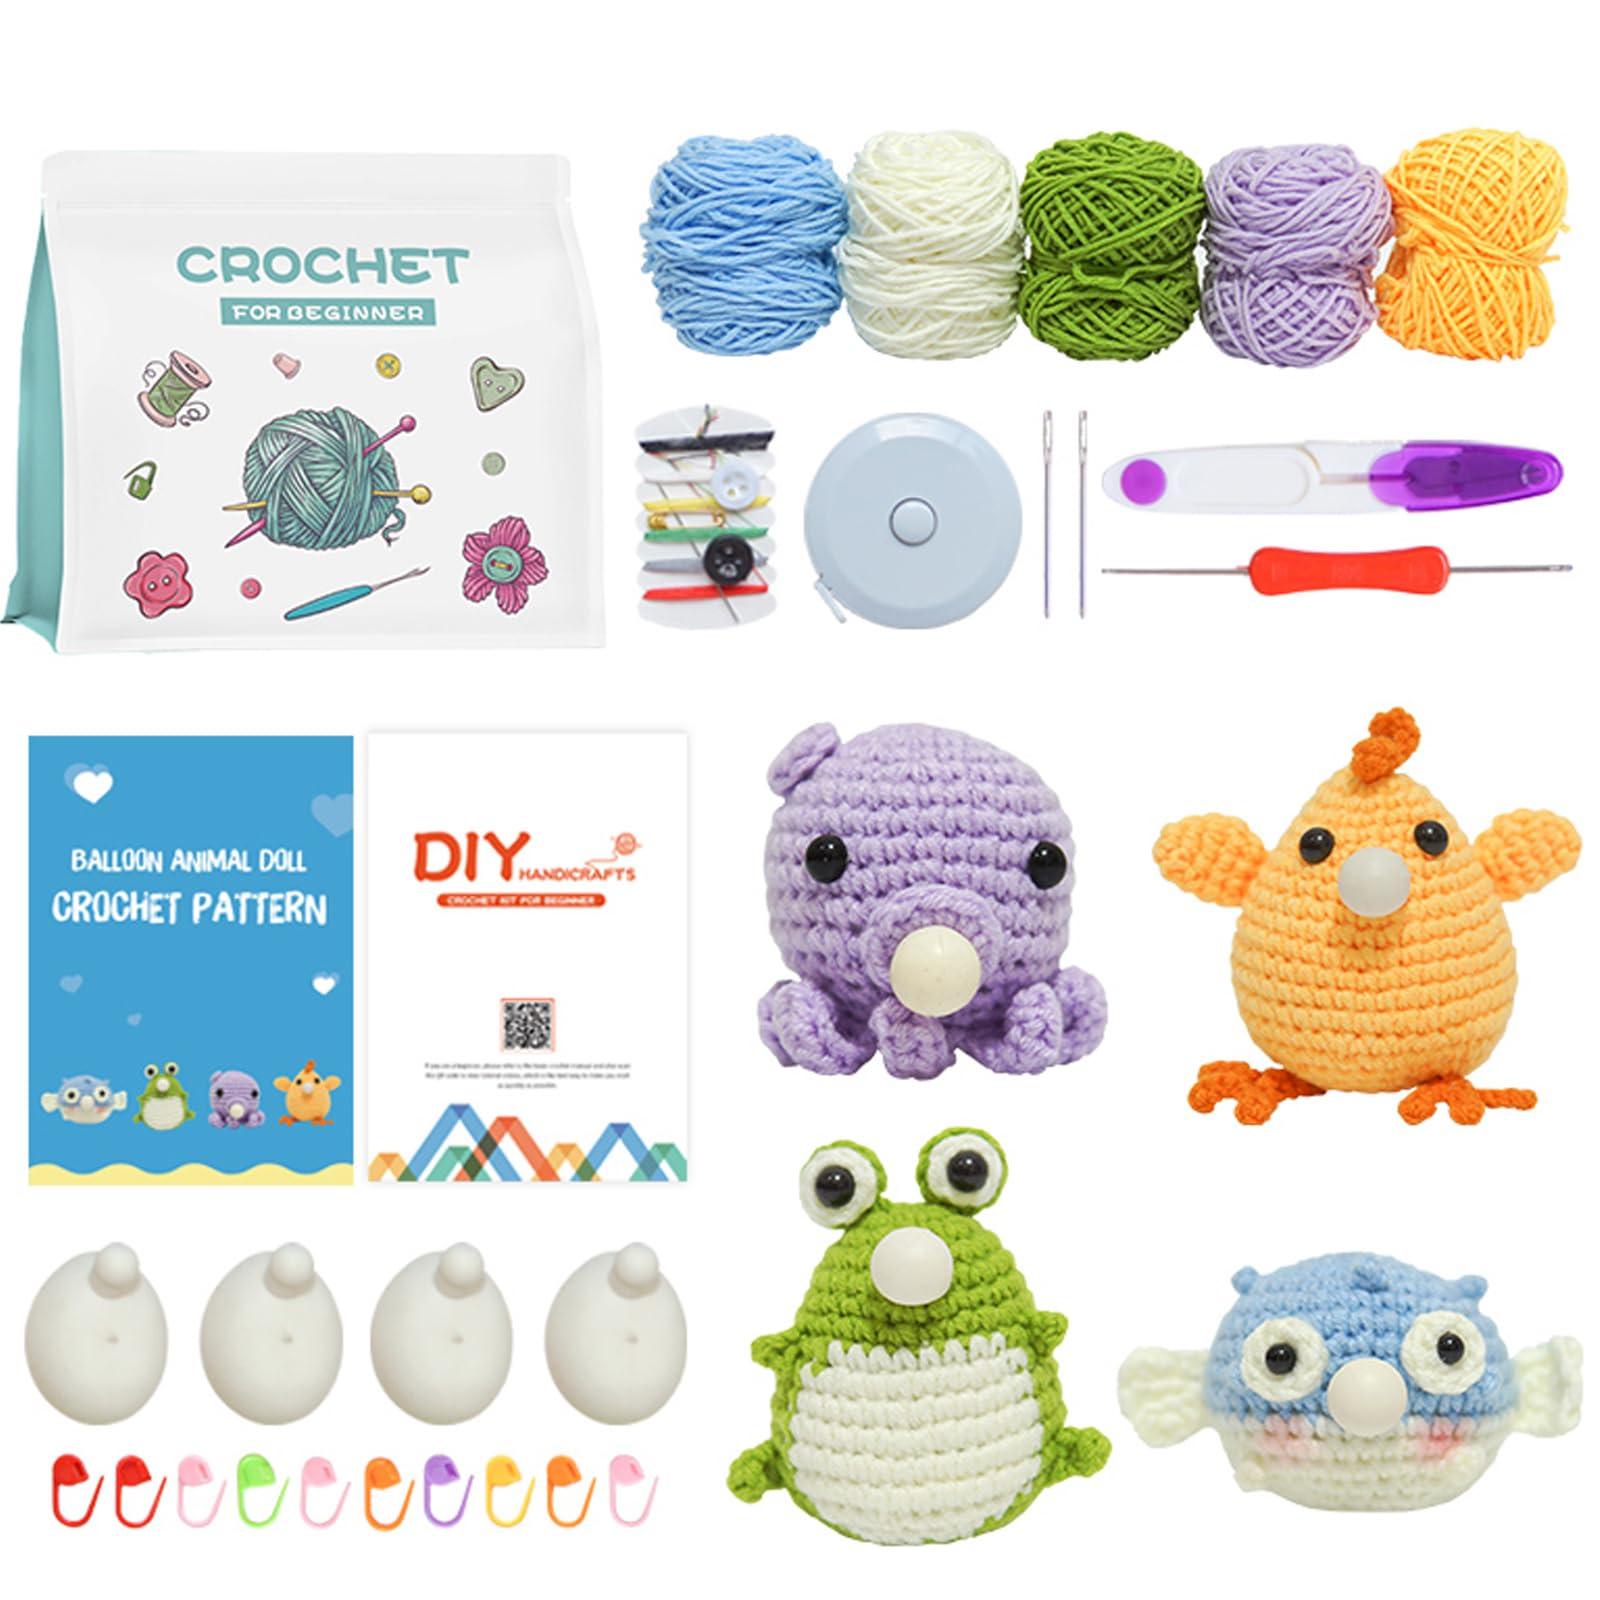 IFUNY Crochet Kit for Beginners Adults,Crochet Animal Kit, Complete Knitting Kit with Yarn, Crochet Hooks, Step-by-Step Video, Learn to Crochet Starter Kit for Beginners（4 Dolls can Blow Balloons